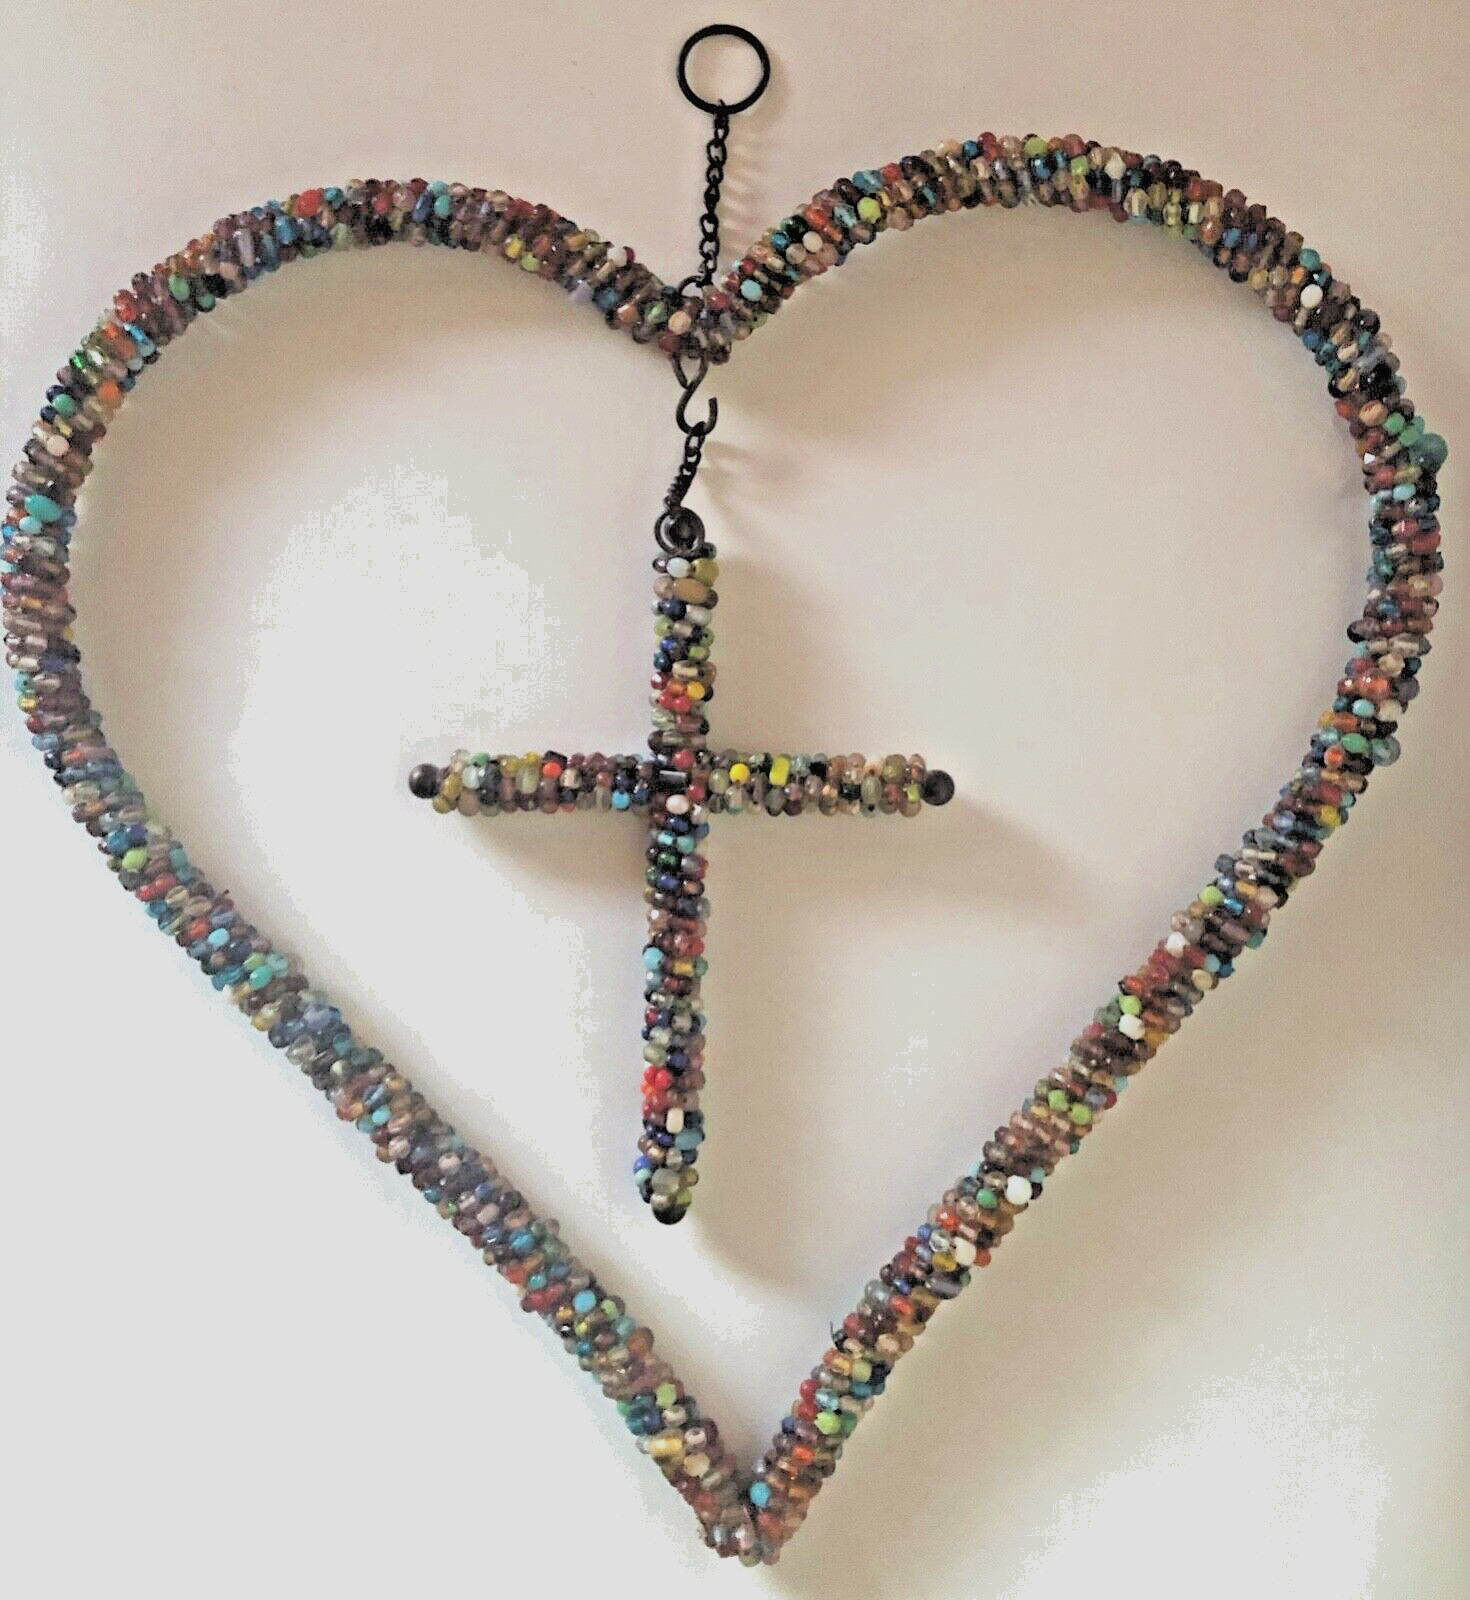 2 pc. VINTAGE RELIGIOUS MEXICAN CULTURE HANDCRAFTED BEADED HEART WALL HANGING